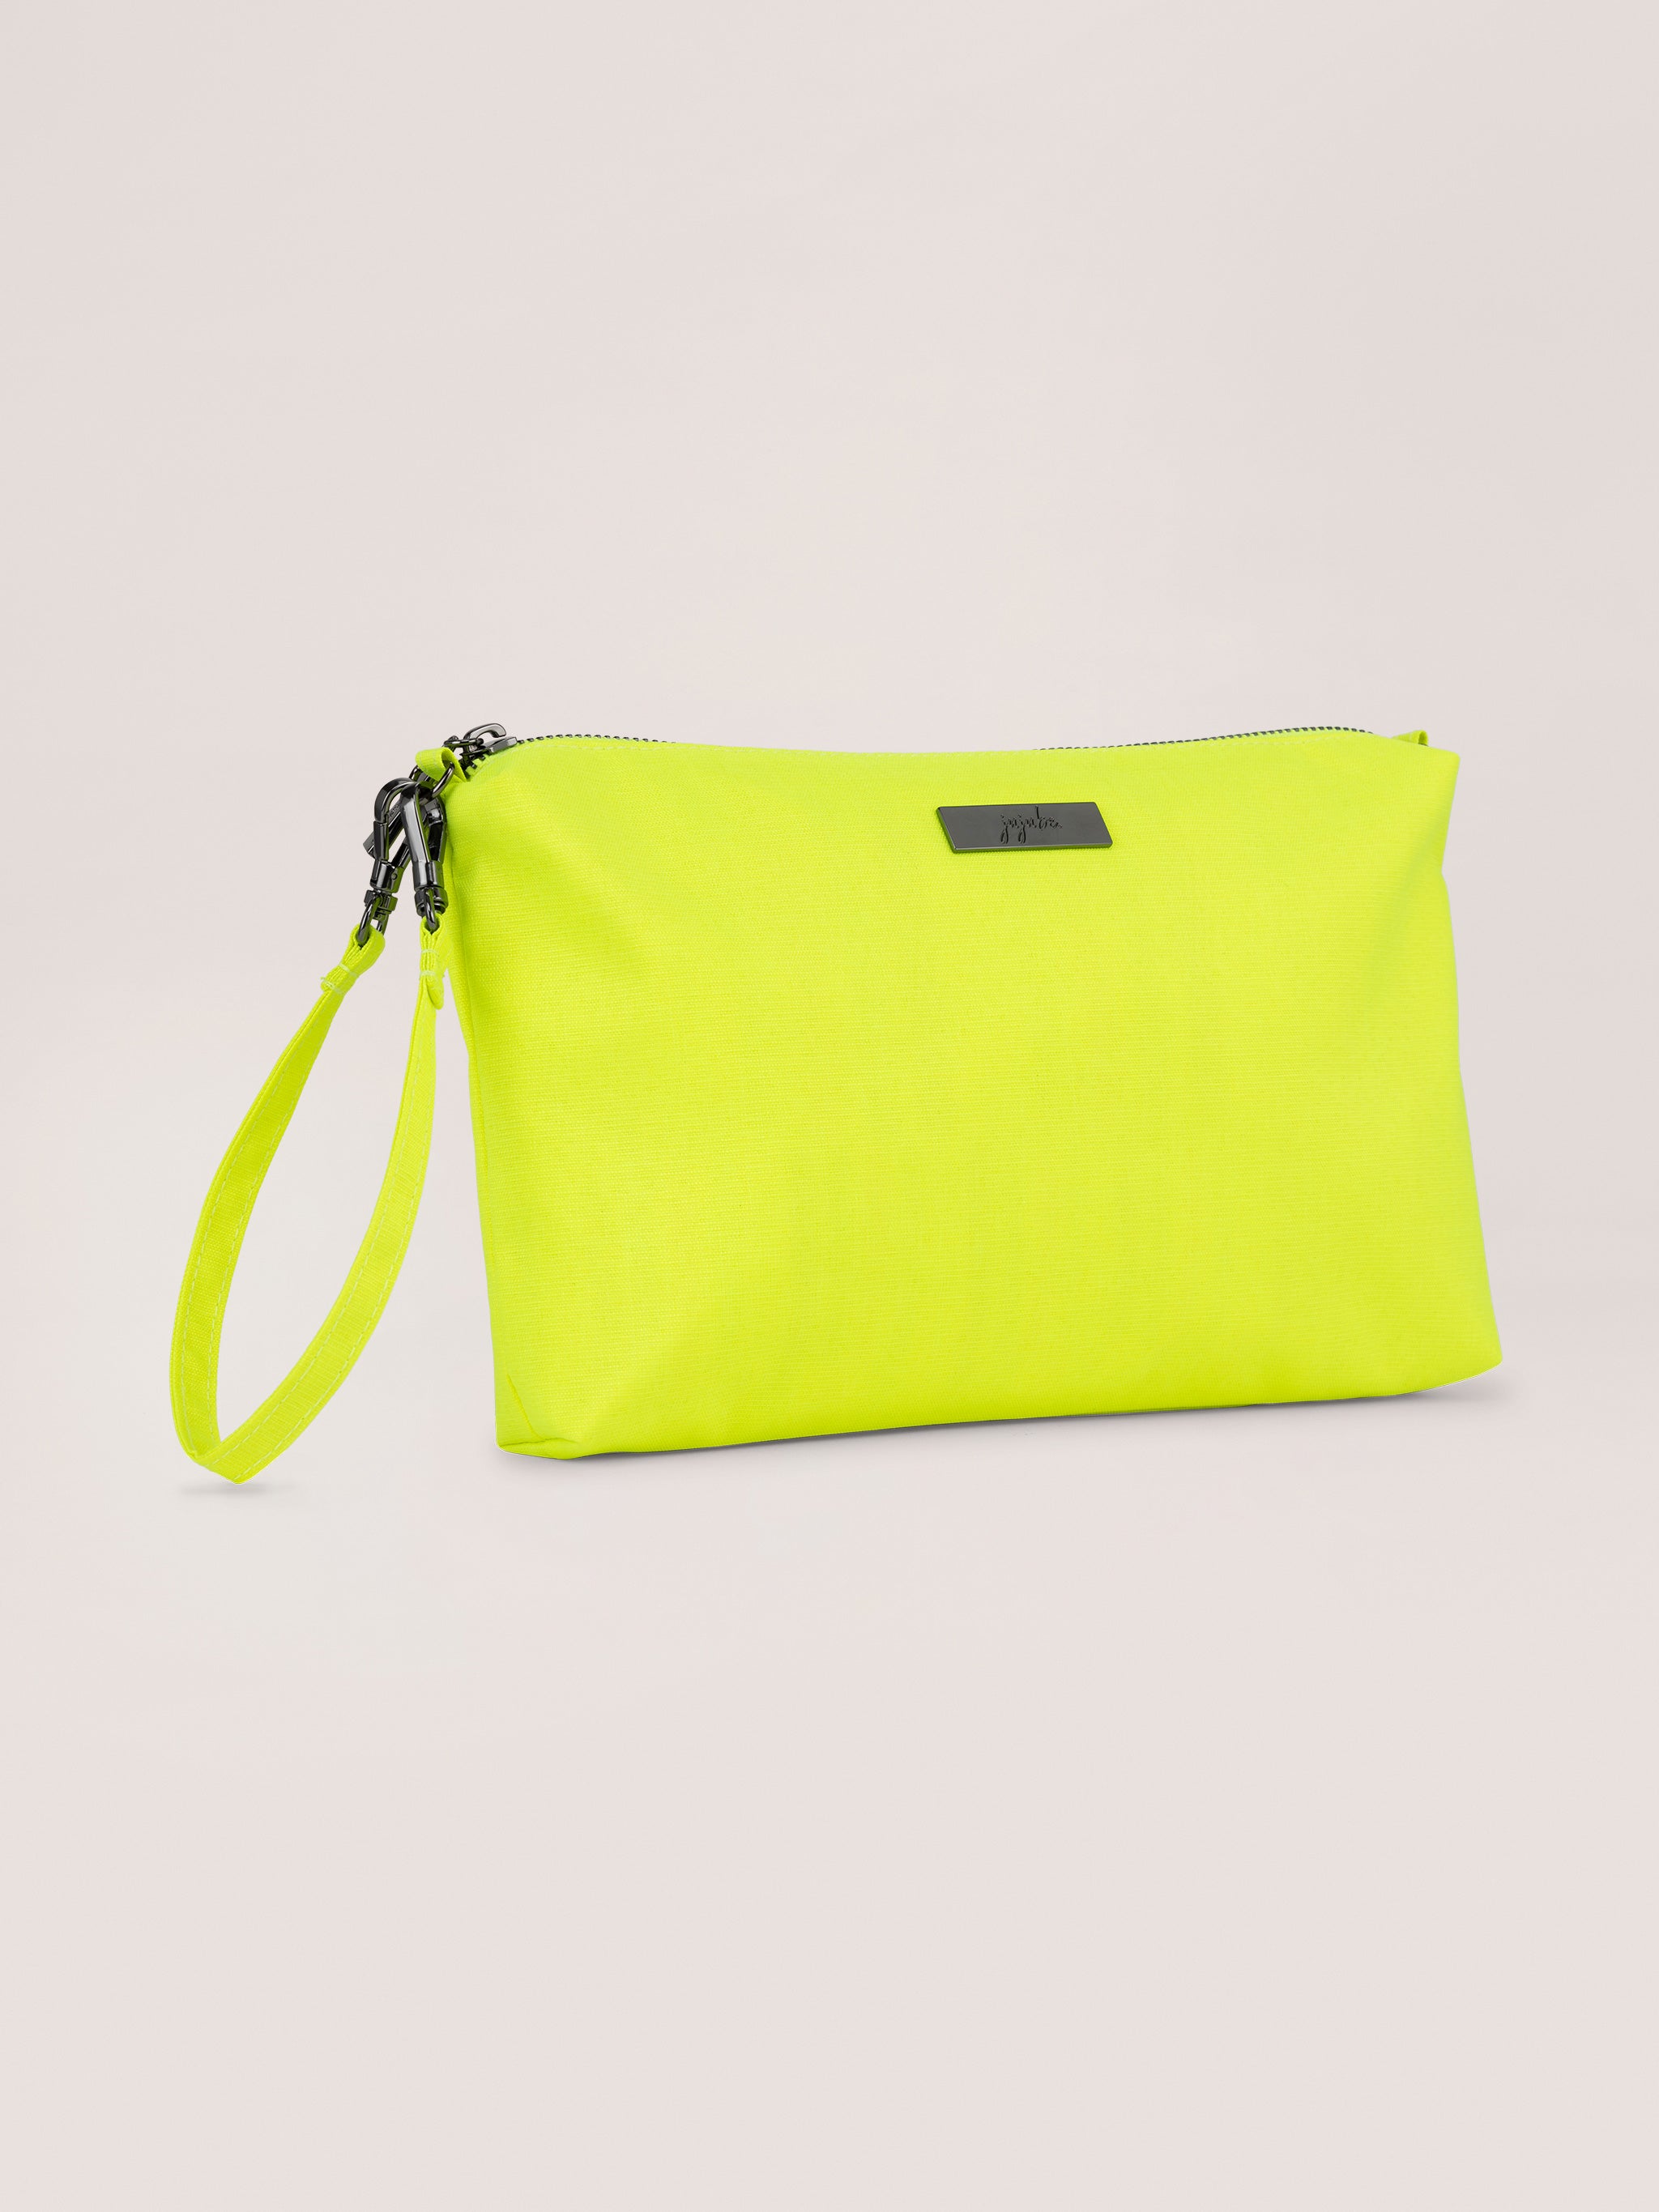 Neon Yellow Be Quick Crossbody Bag Quarter Angle View with Wristlet Strap